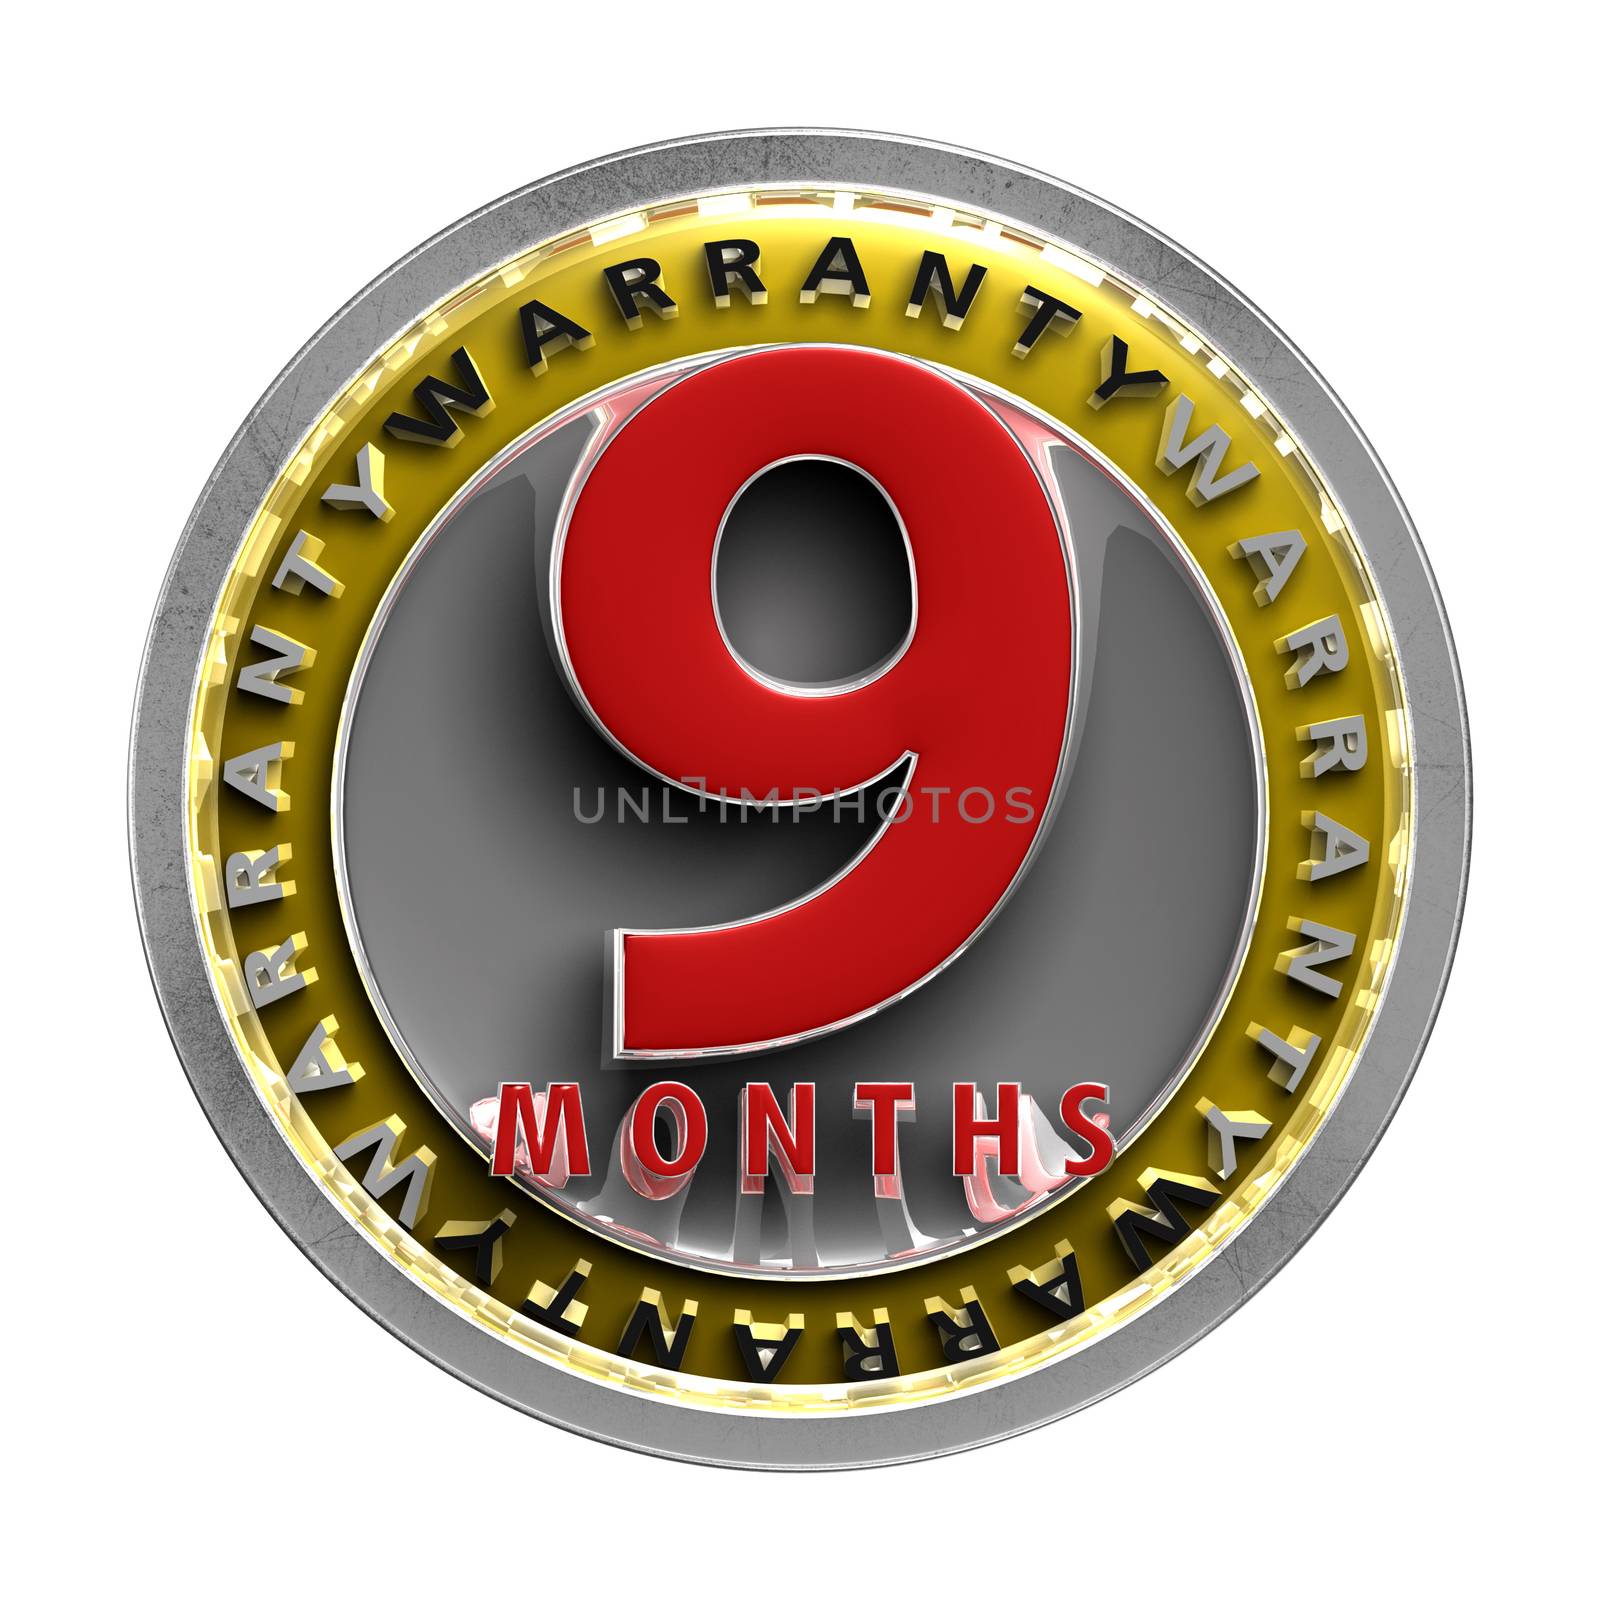 9 months warranty signs 3d. by thitimontoyai